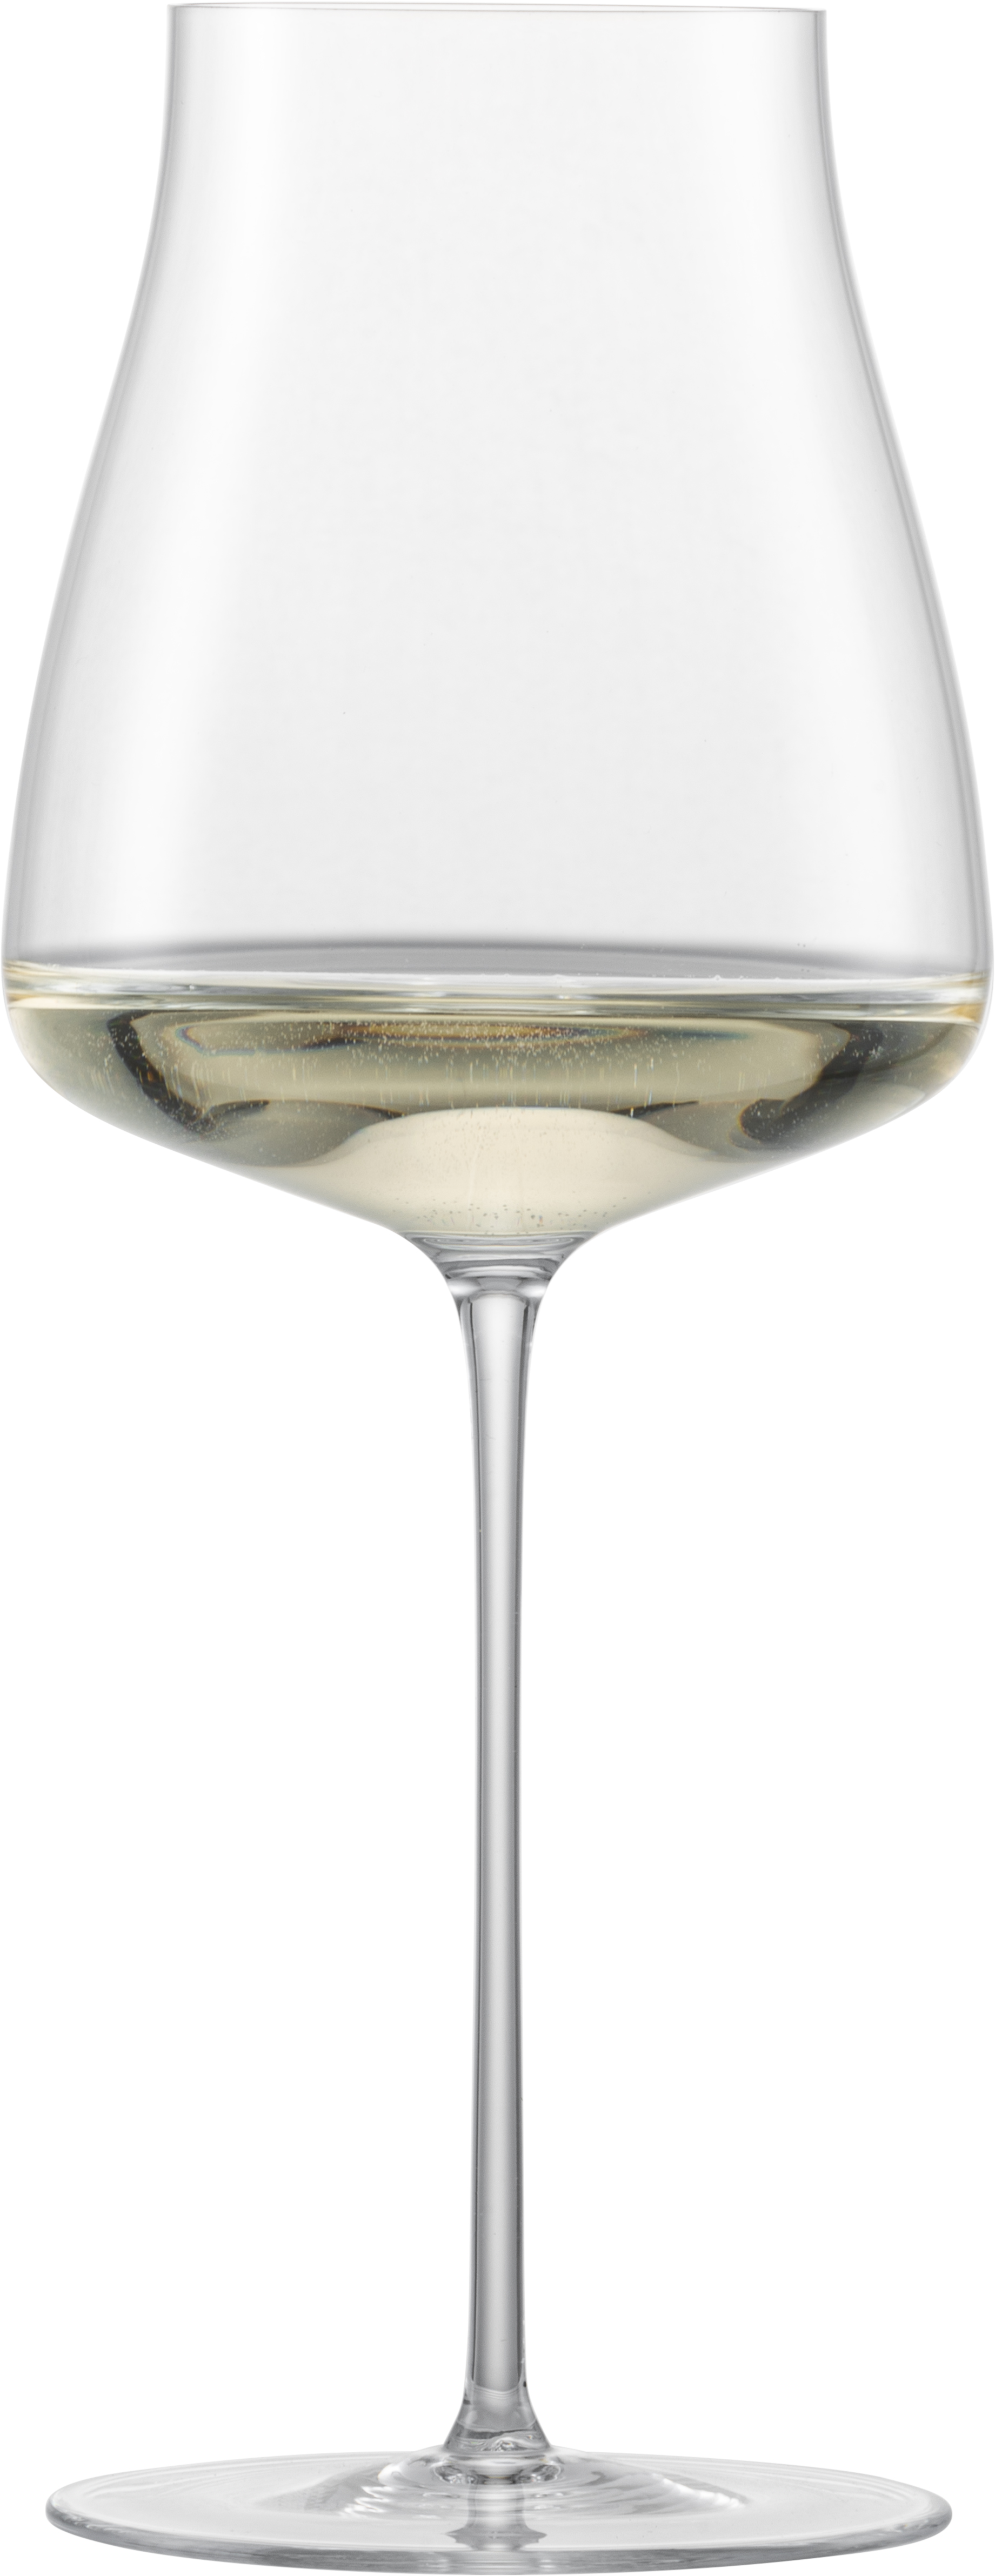 The Moment Riesling White Wine Glass 34 cl, 2-pack - Zwiesel @ RoyalDesign